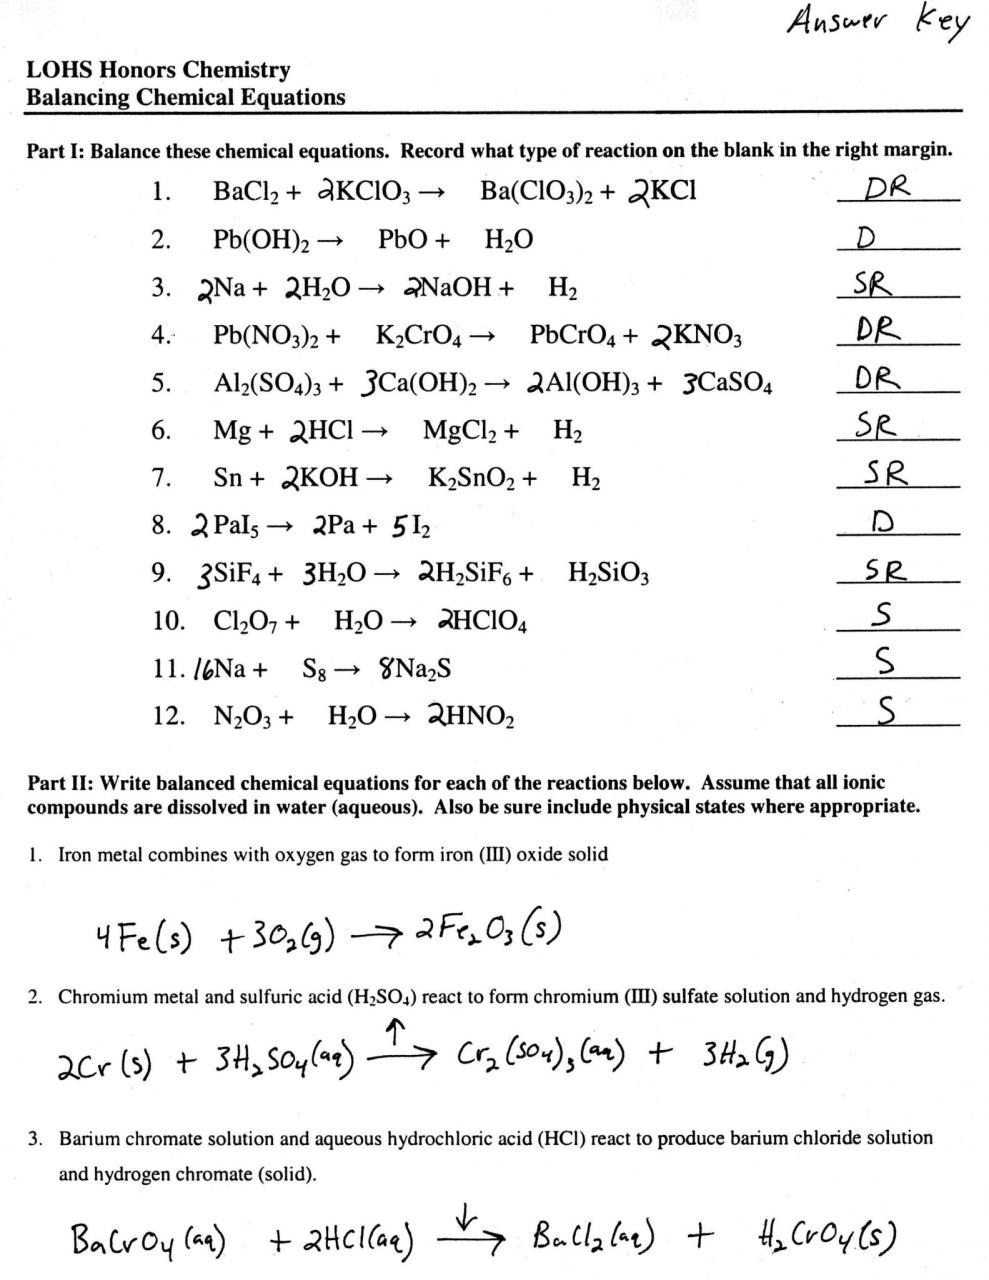 Balancing Equations Practice Problems Answers